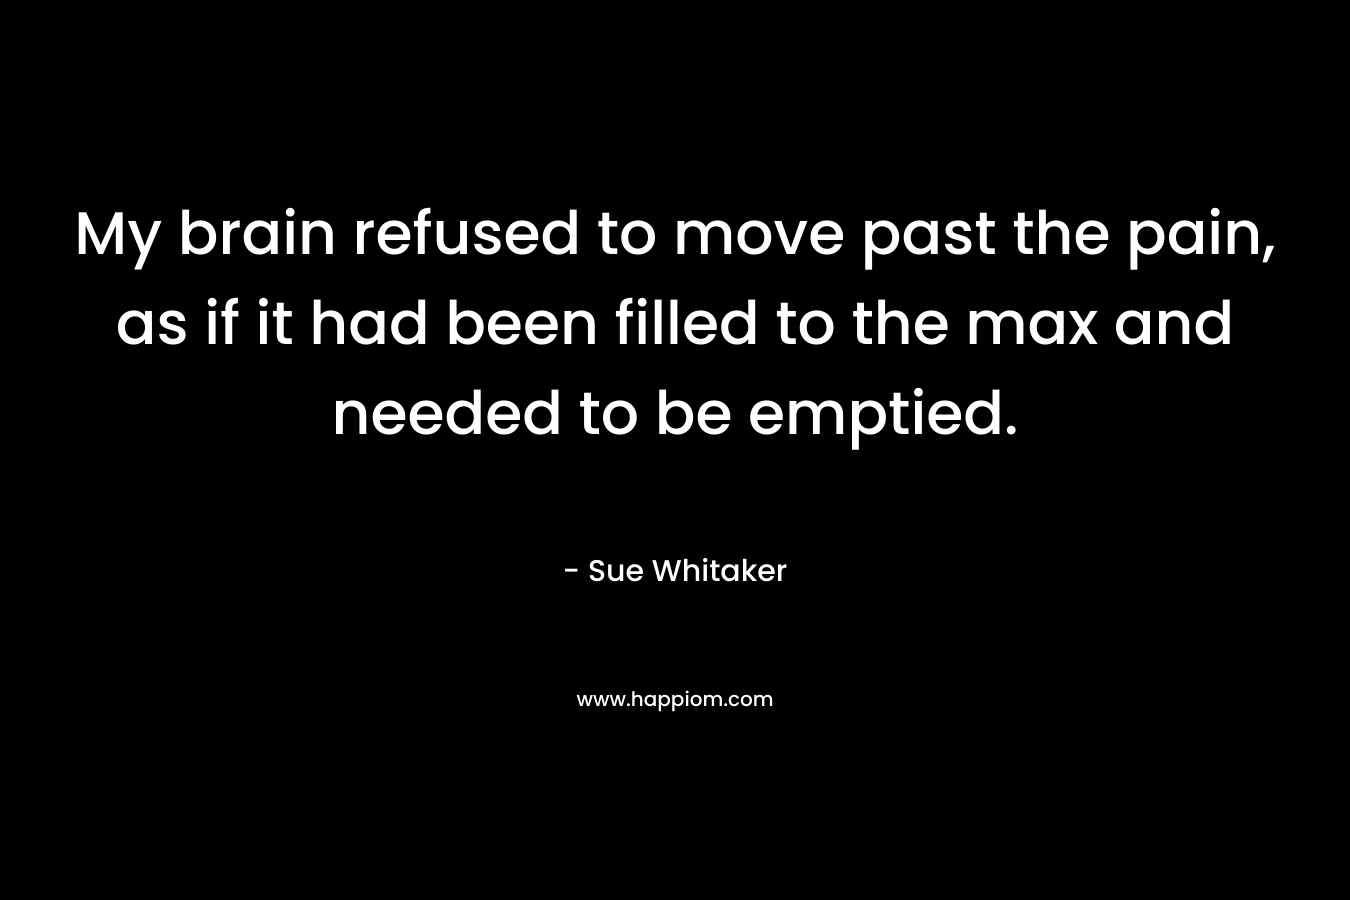 My brain refused to move past the pain, as if it had been filled to the max and needed to be emptied. – Sue Whitaker